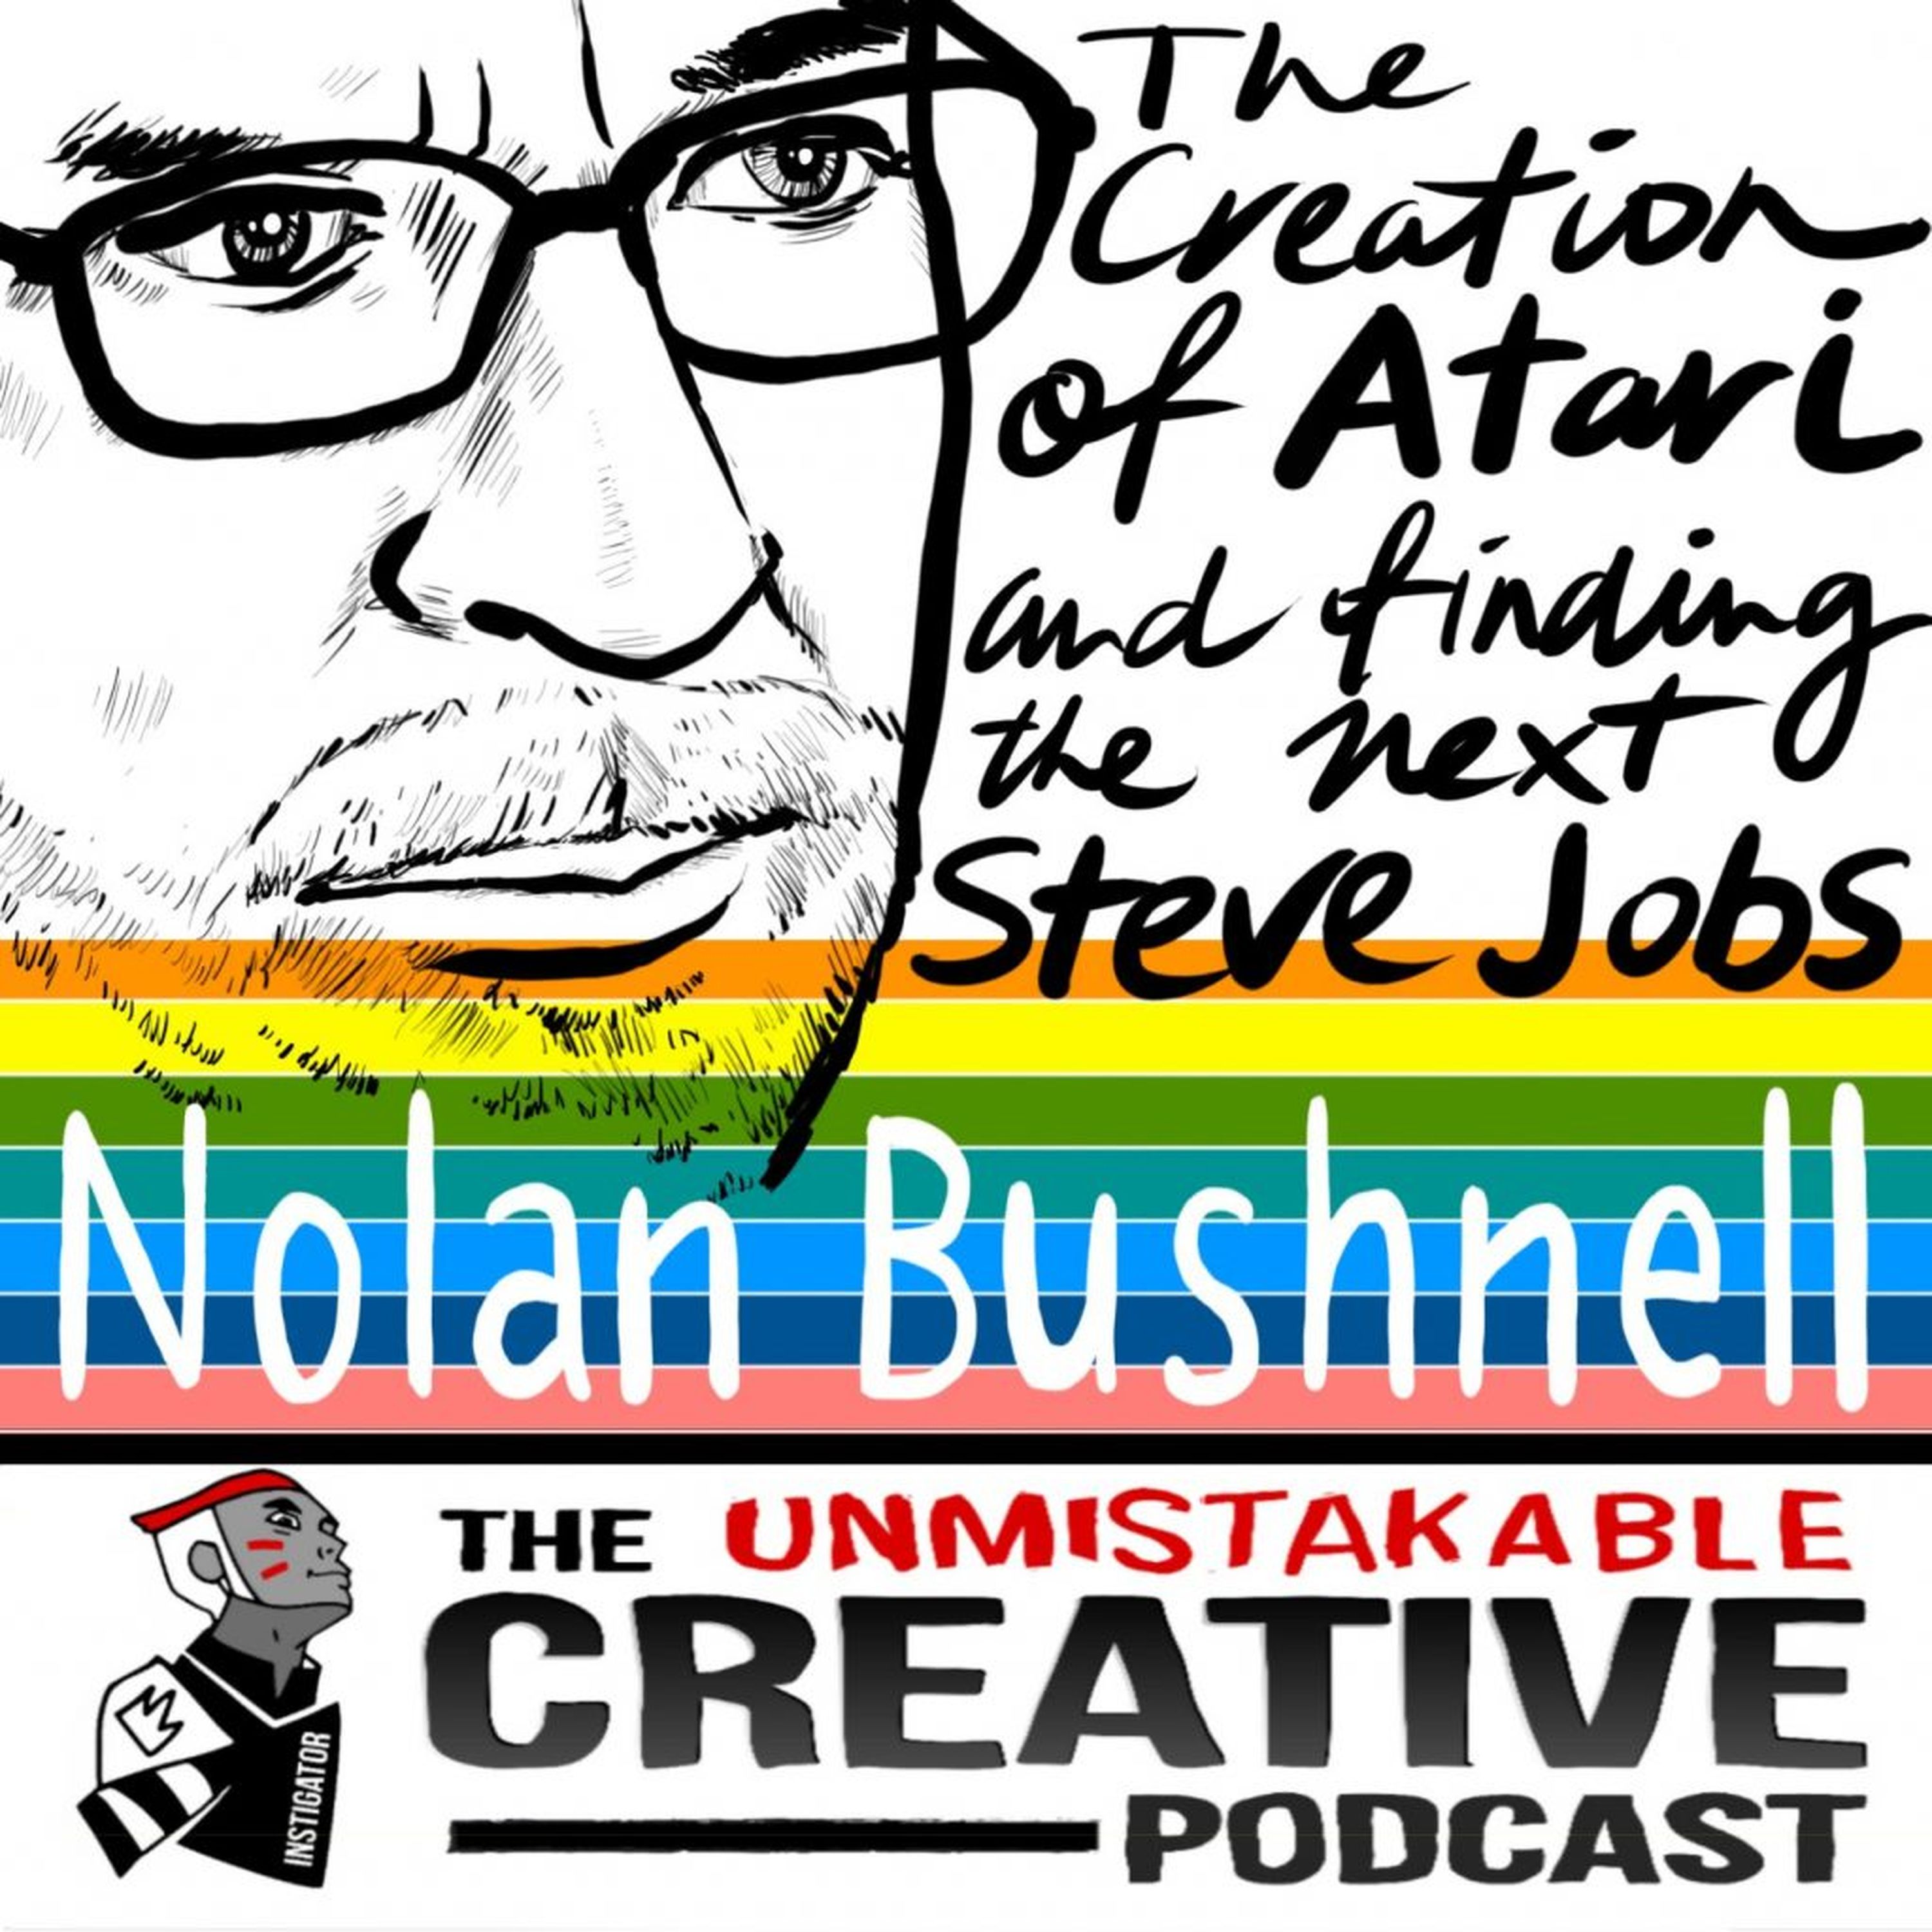 Best Of: The Creation of Atari and Finding The Next Steve Jobs with Nolan Bushnell Image